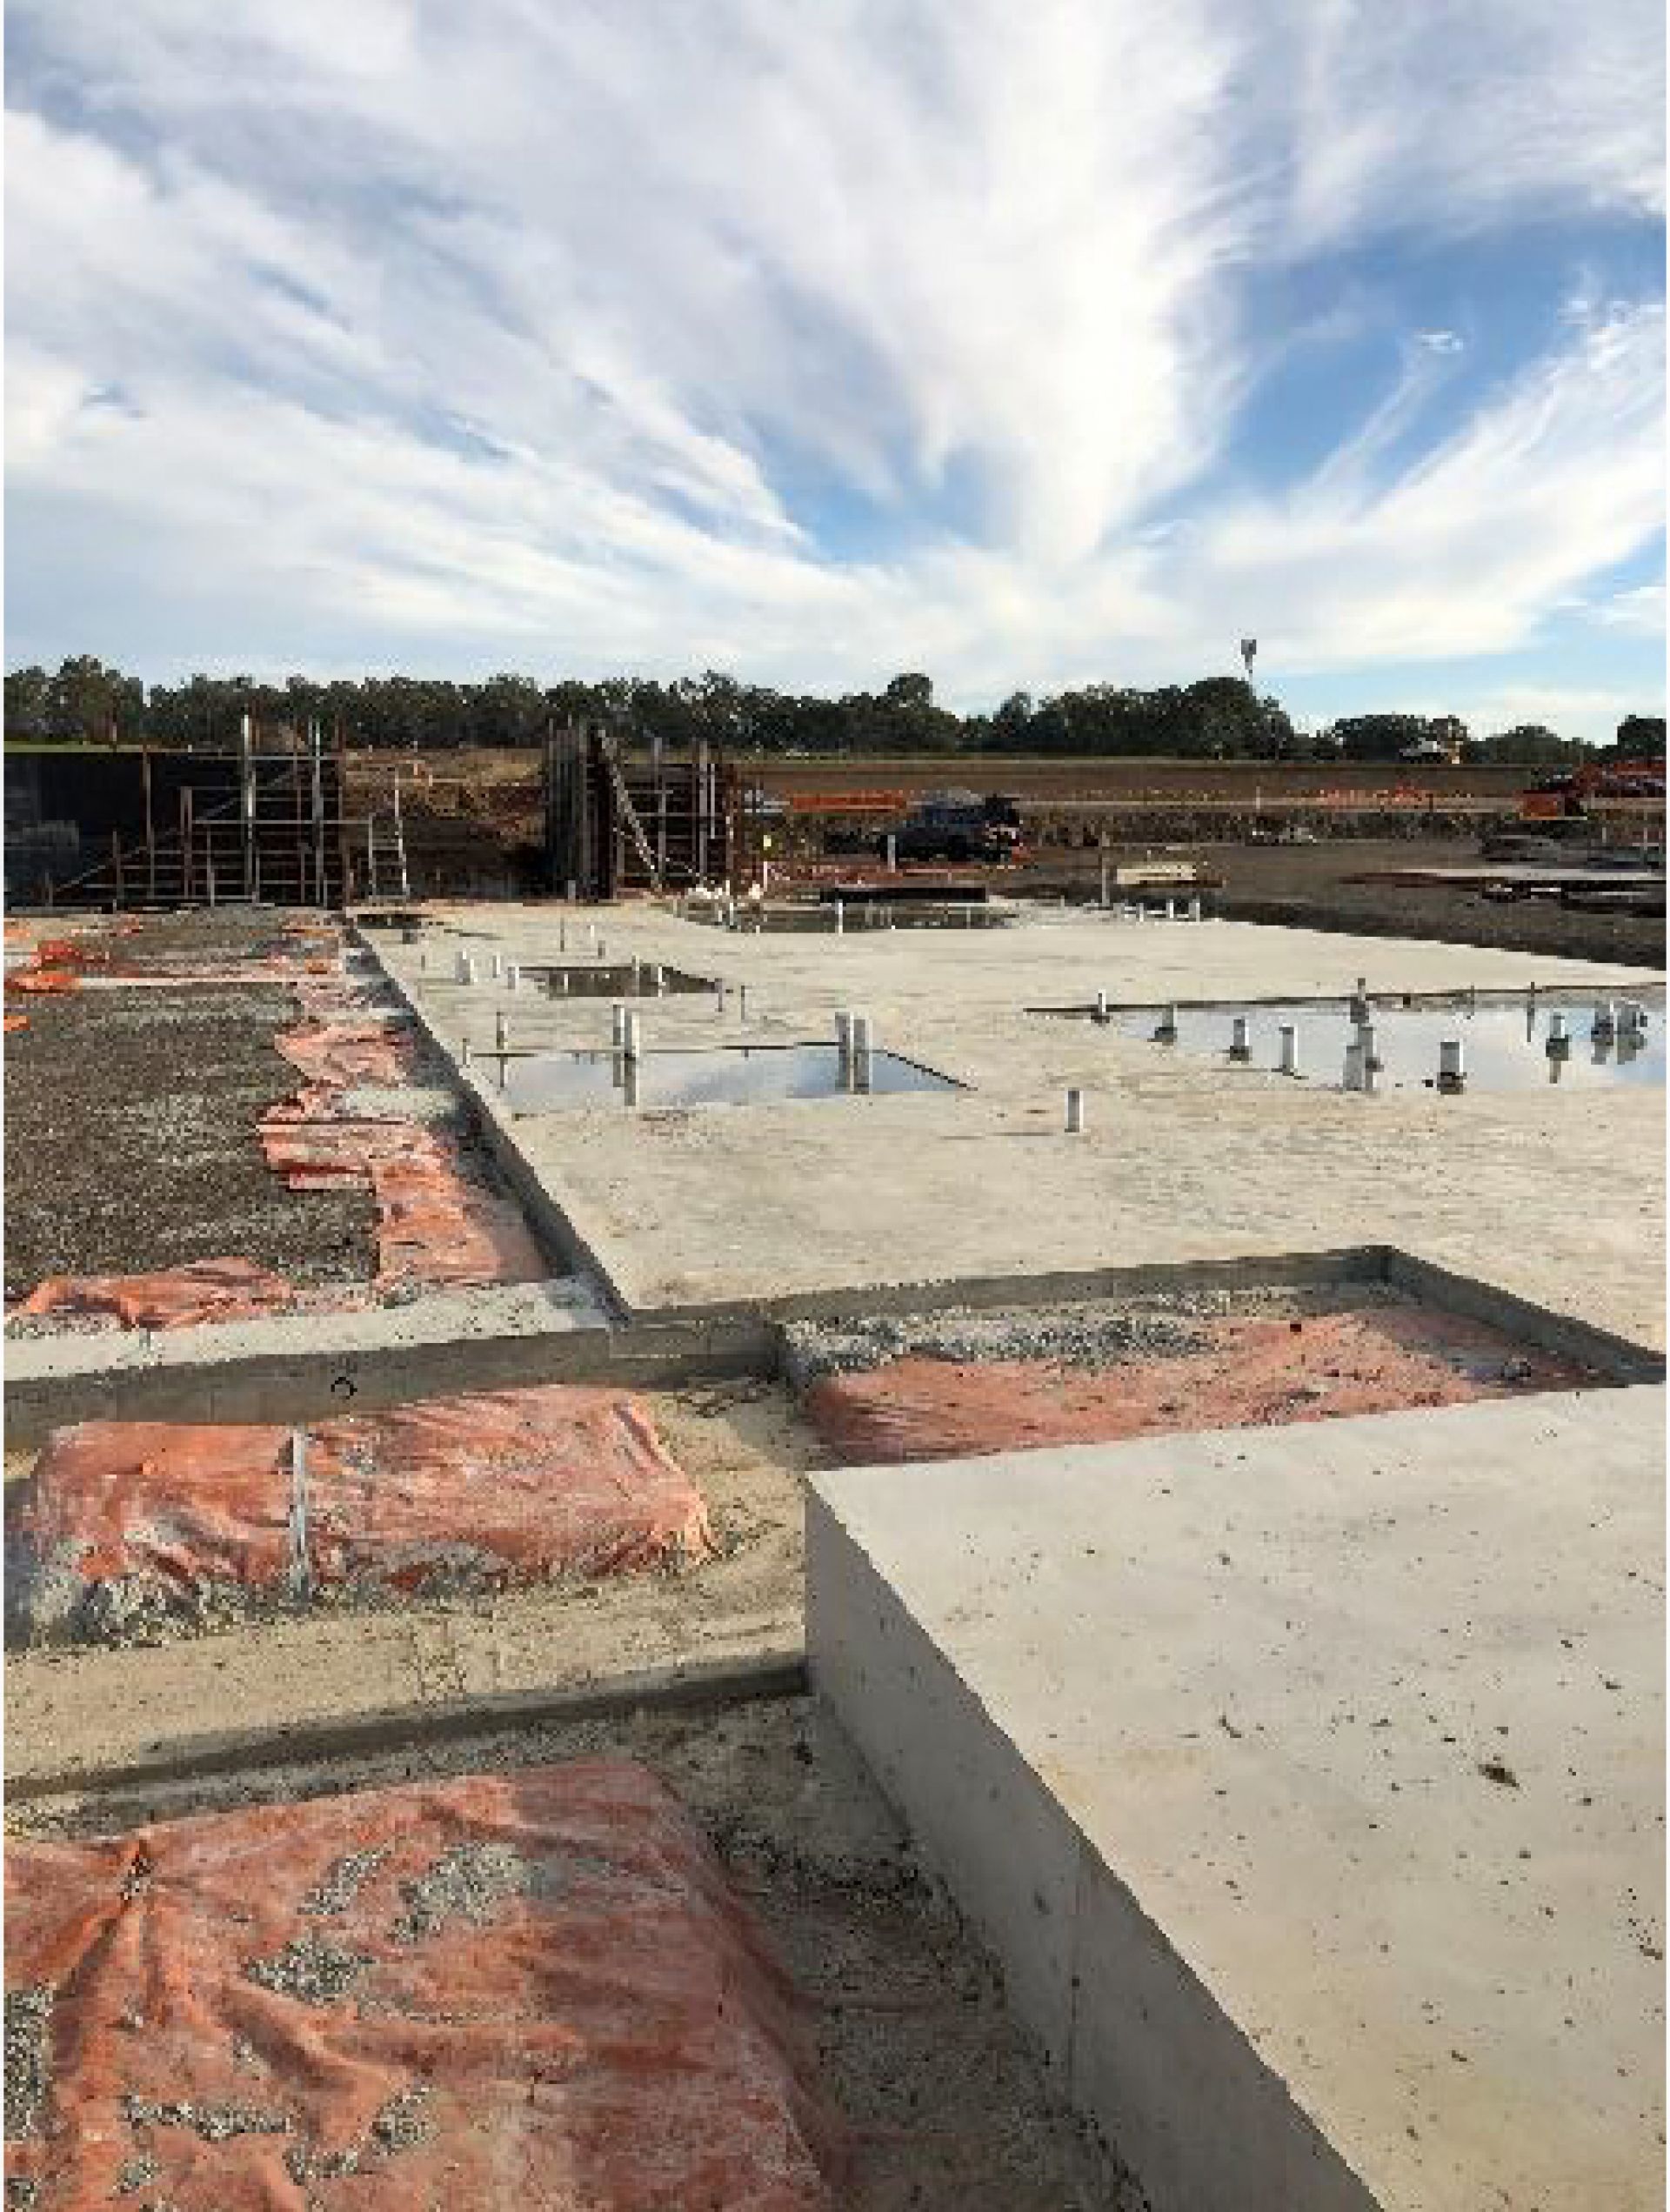 RSH Soccer building ground floor slab early May 2020